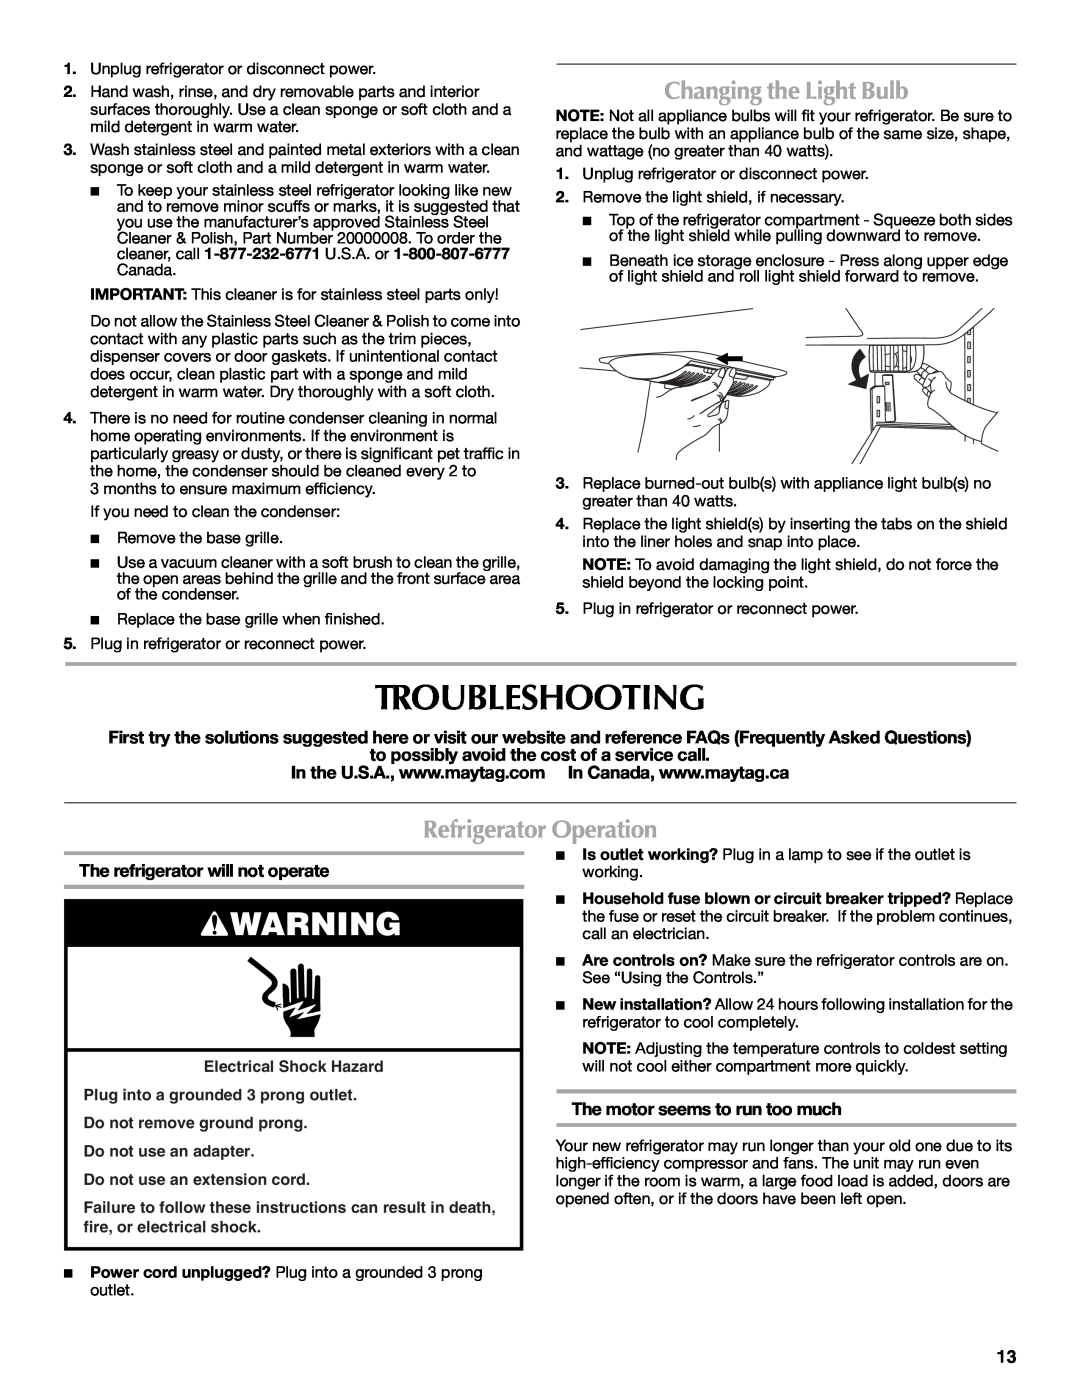 Maytag W10175477A Troubleshooting, Changing the Light Bulb, Refrigerator Operation, The refrigerator will not operate 